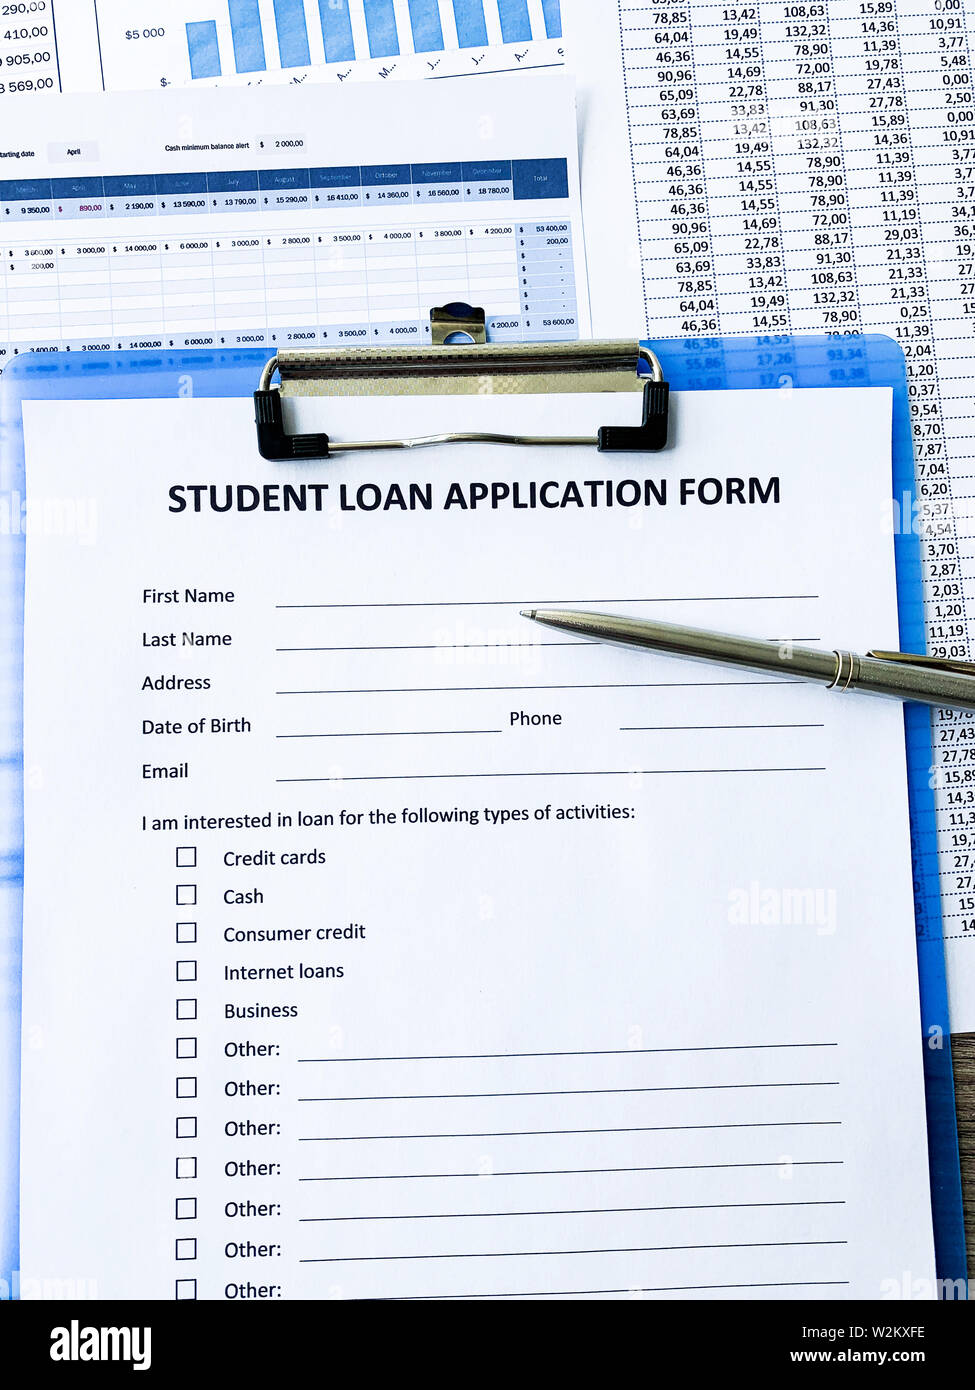 Student loan application form document on table Stock Photo